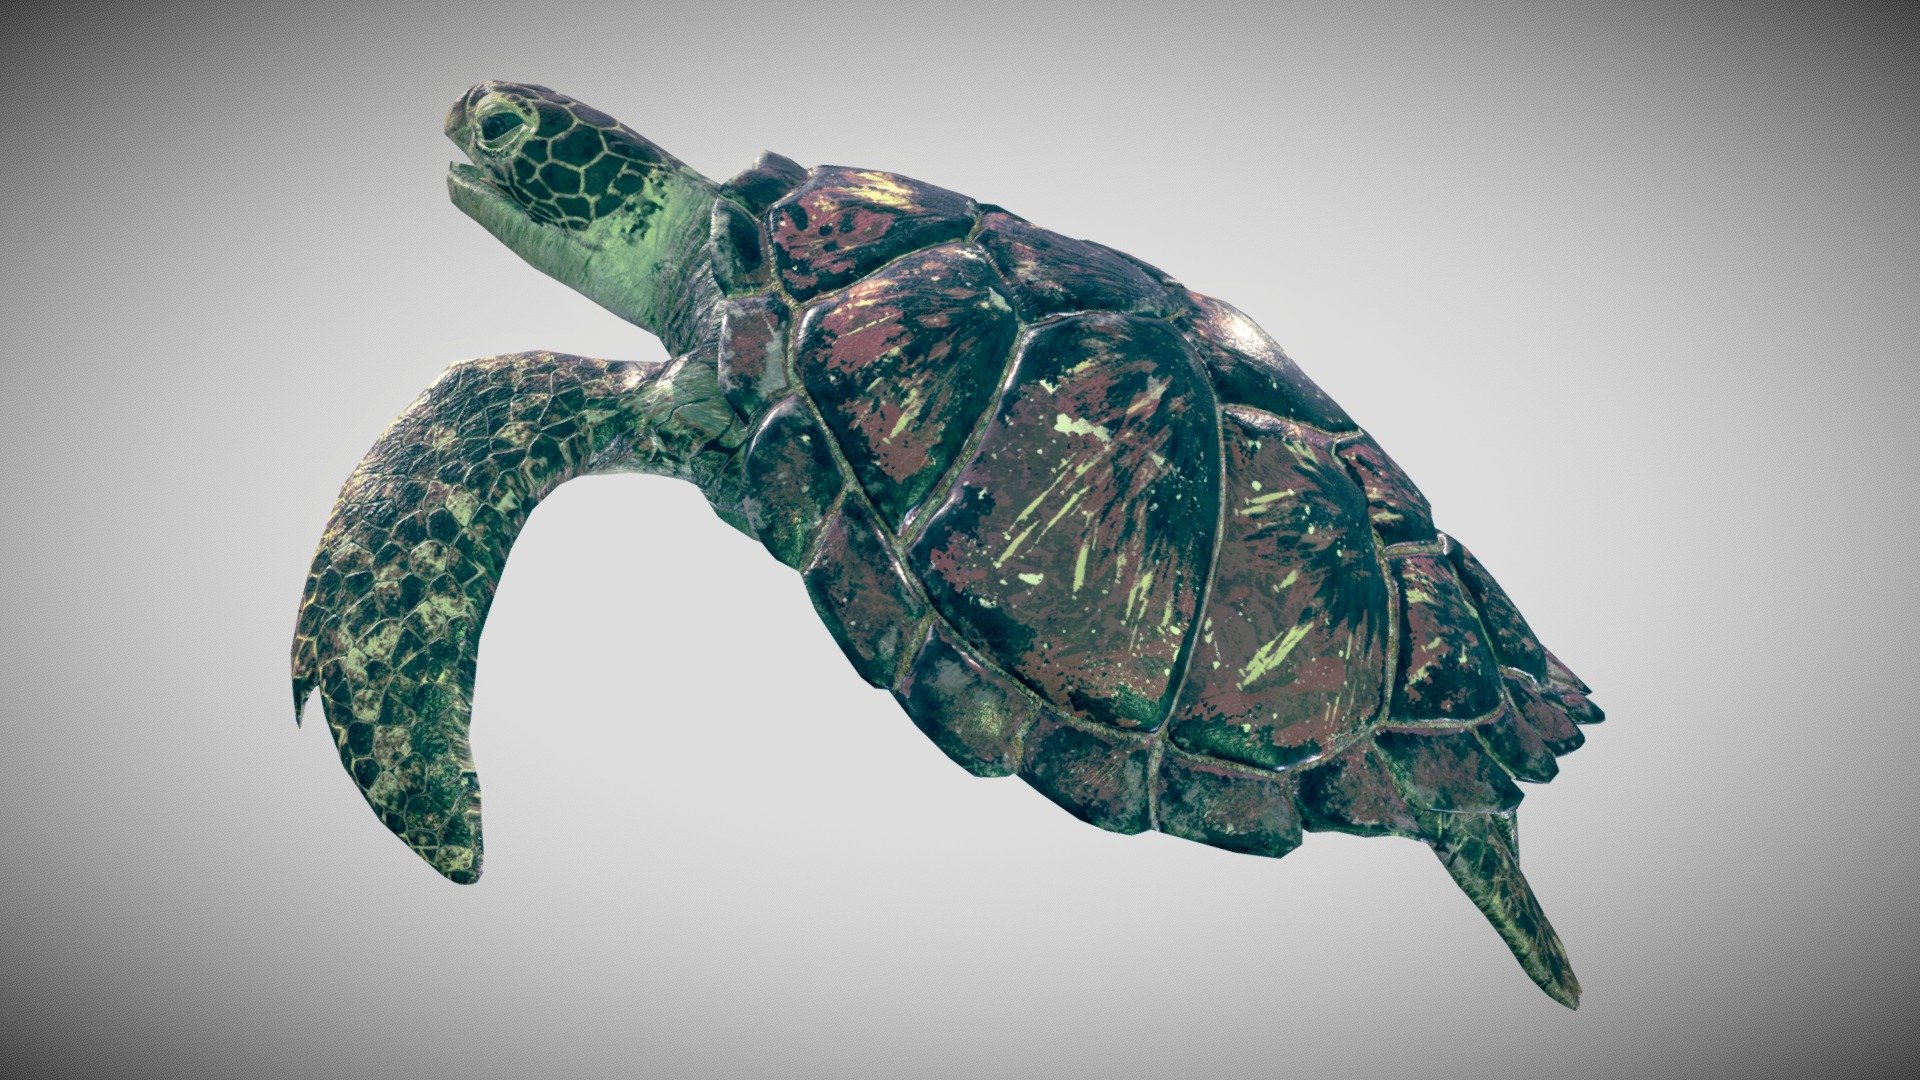 The SeaTurtle 3d model was made in blender 2.9 and painted in substance painter , is subdivison ready , without subdivision it haves 4723 verts and when  subdividing everything is 19382 verts  , It is fully rigged with basic bones, in the blend file the rig is ready to use.

It comes with a game intended fbx with 4 lods : lod0 :4723 , lod1 :3080 , lod2:2218 and lod 3 :1487 verts.

it have a total of 7 animations

The texture comes with 4k, 2k and 1k textures : diffuse , normal , roughness, metallic , emissive and AO maps , baked normal map from a high poly model and place it in the low poly model , uv wrapped it manually .

Eyes  and tongue , all is in one texture.

Comes with blend file and the textures attached in rar.

if you have compatibility issues when importing animations to other softwares , leave it at the comments so i can fix it.

This is a remodel that i did of my first sea turtle model hope you like it :) 3d model